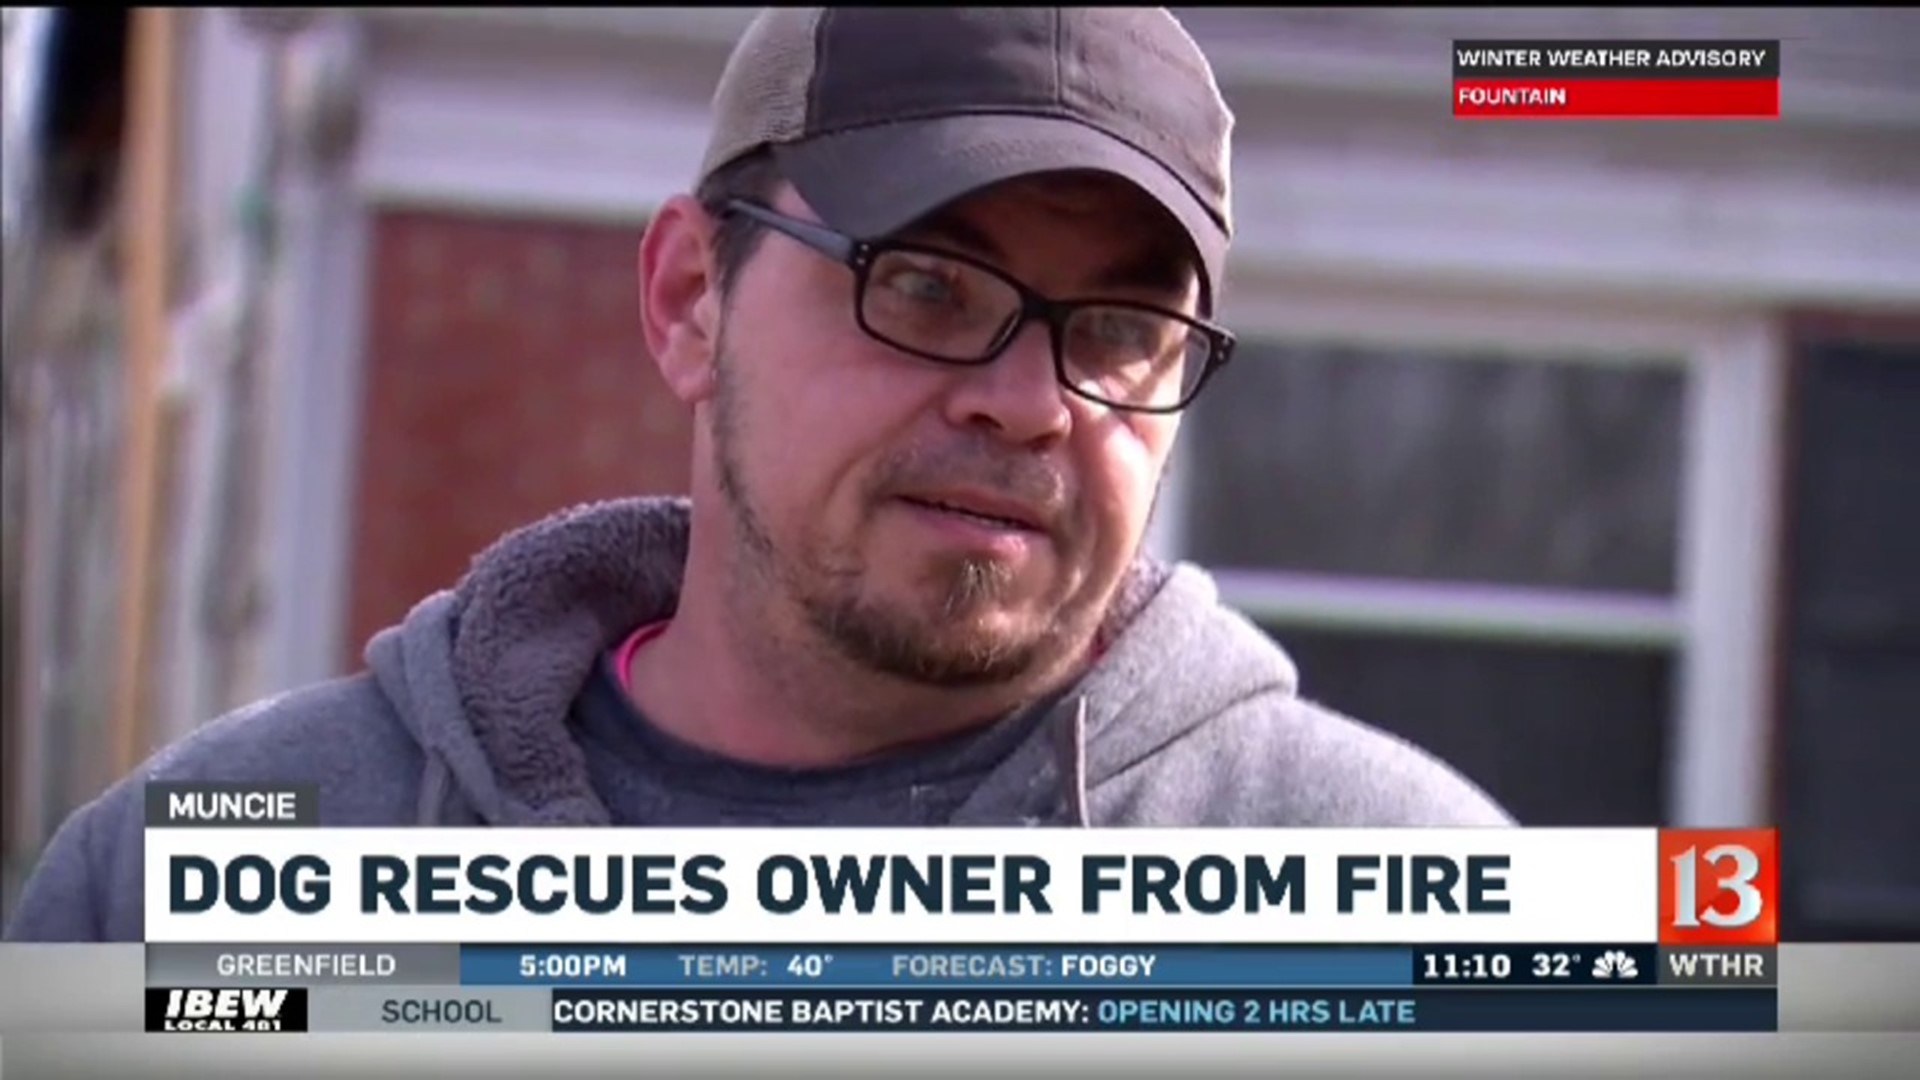 Dog Rescues Owner from Fire (1)